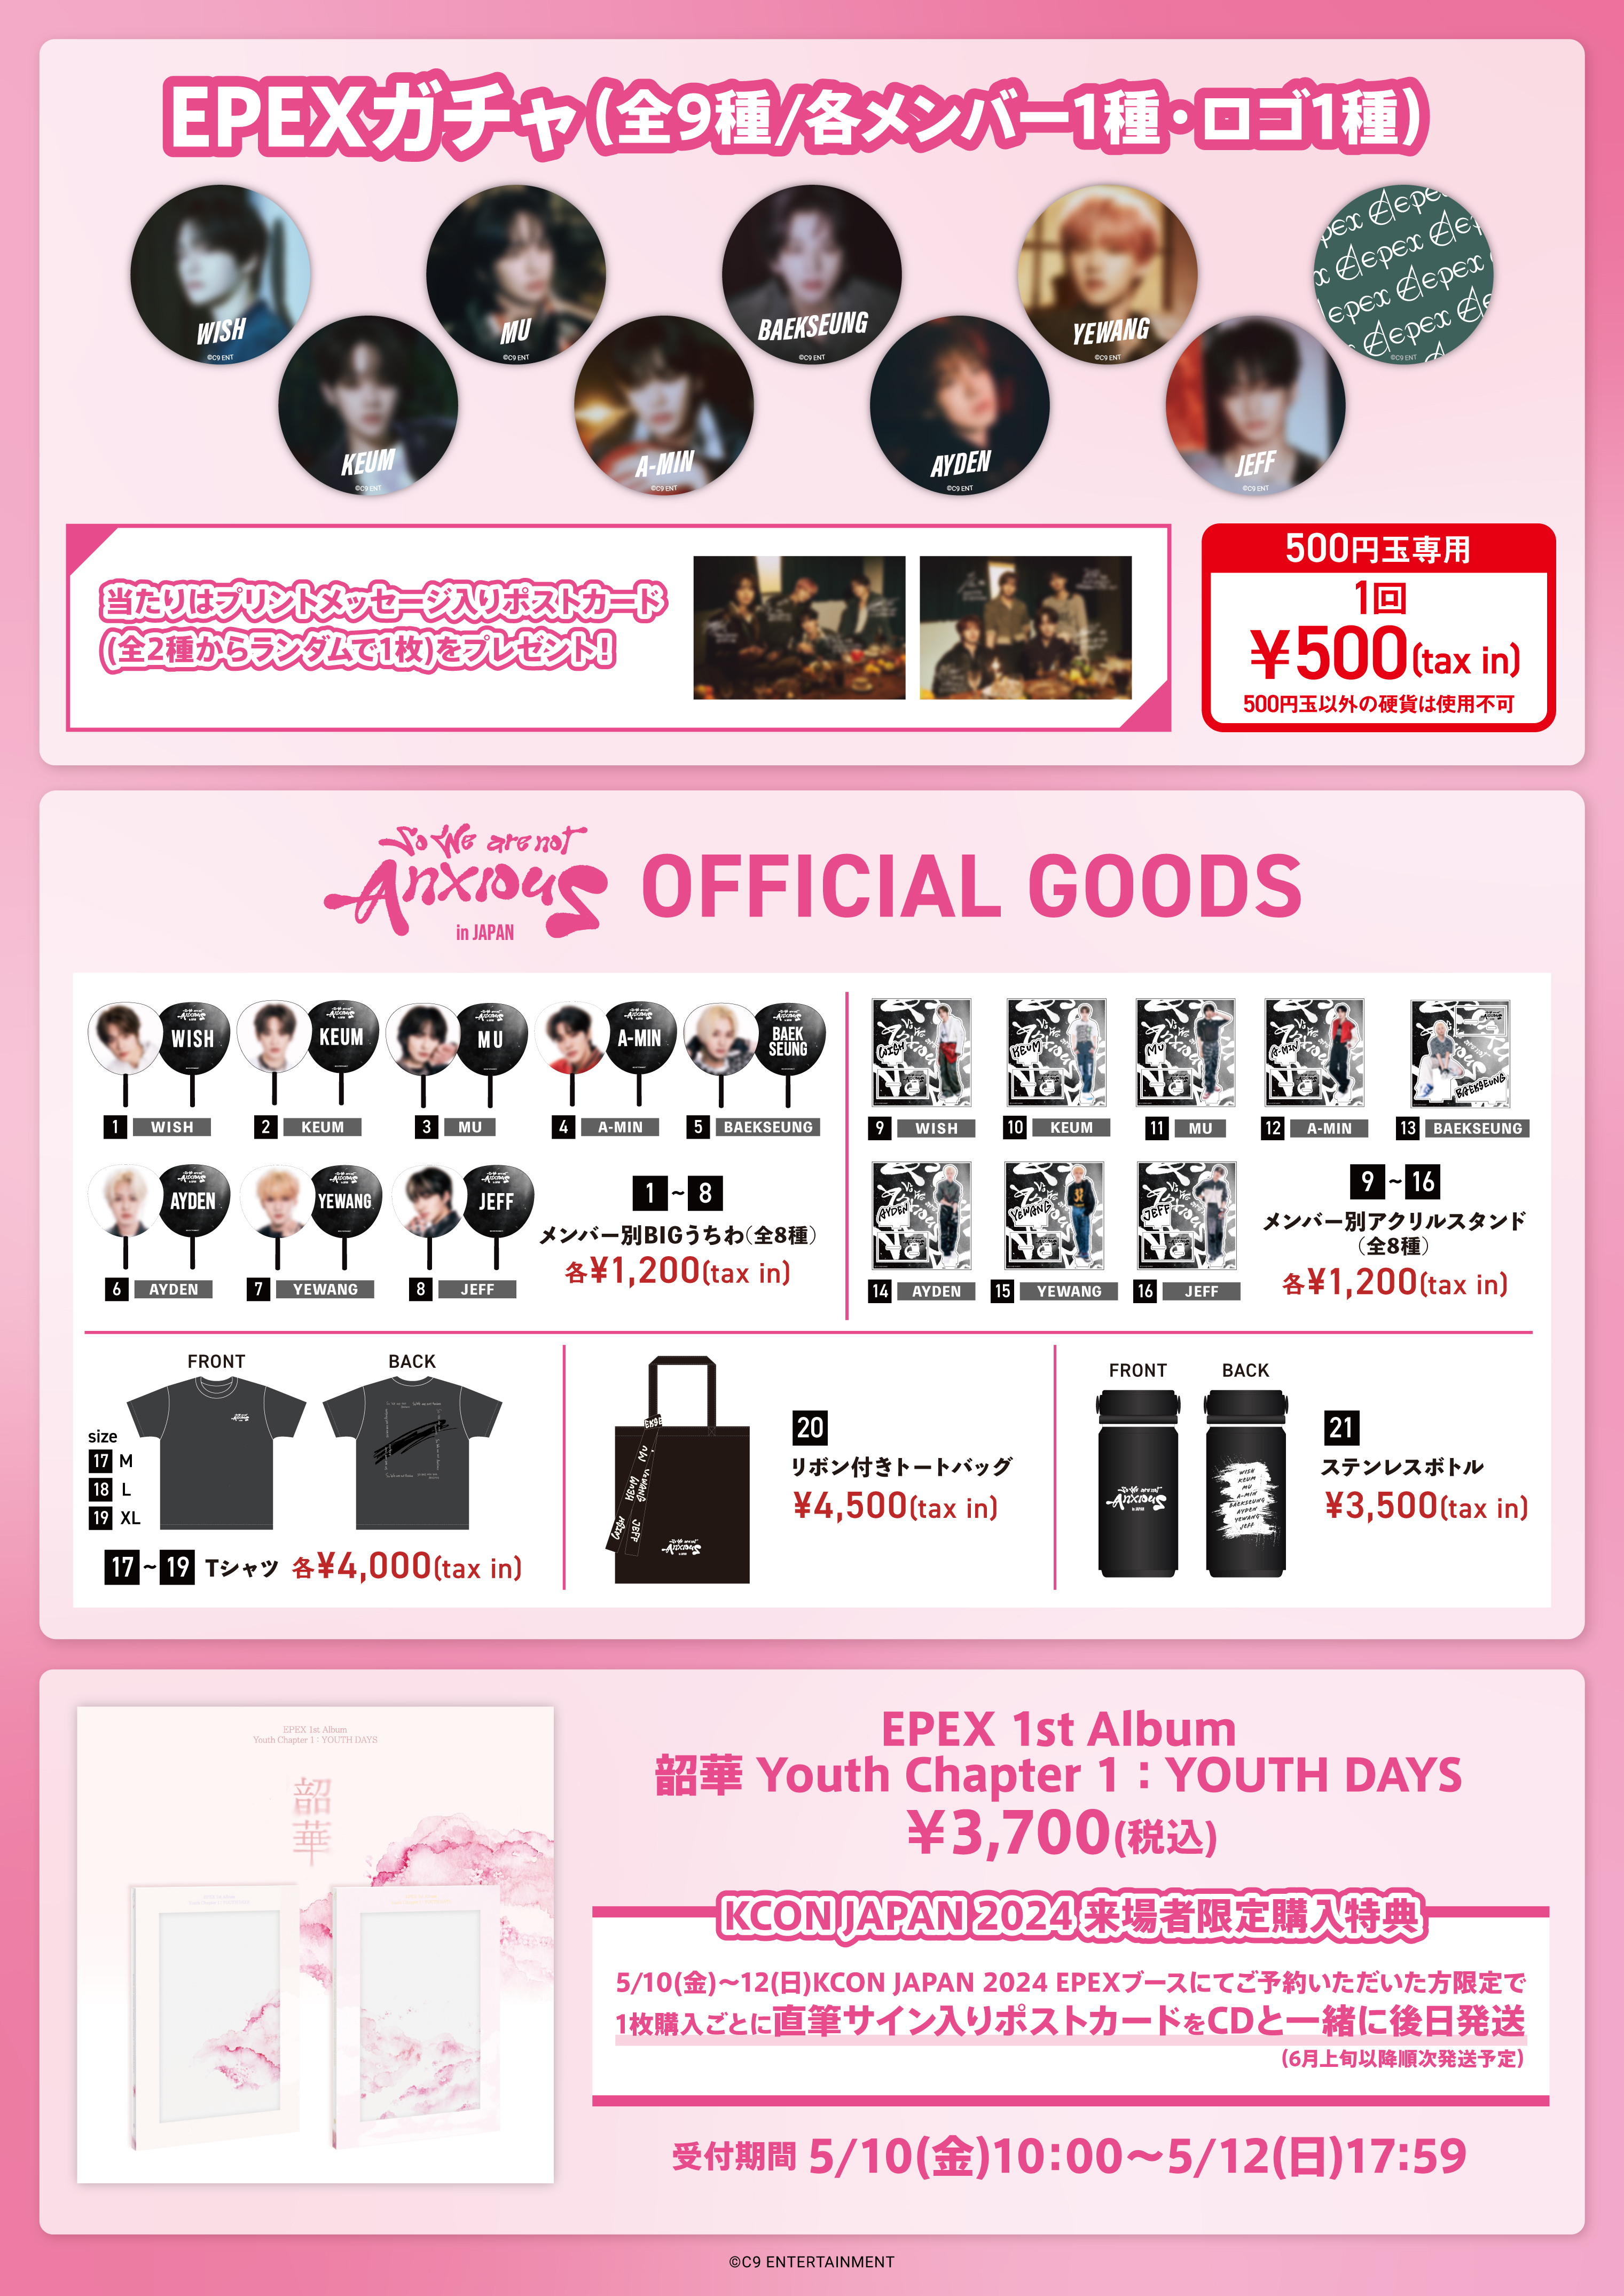 KCON JAPAN 2024」にてEPEXブース出展決定👏 - EPEX JAPAN OFFICIAL FANCLUB 【ZENITH JAPAN】